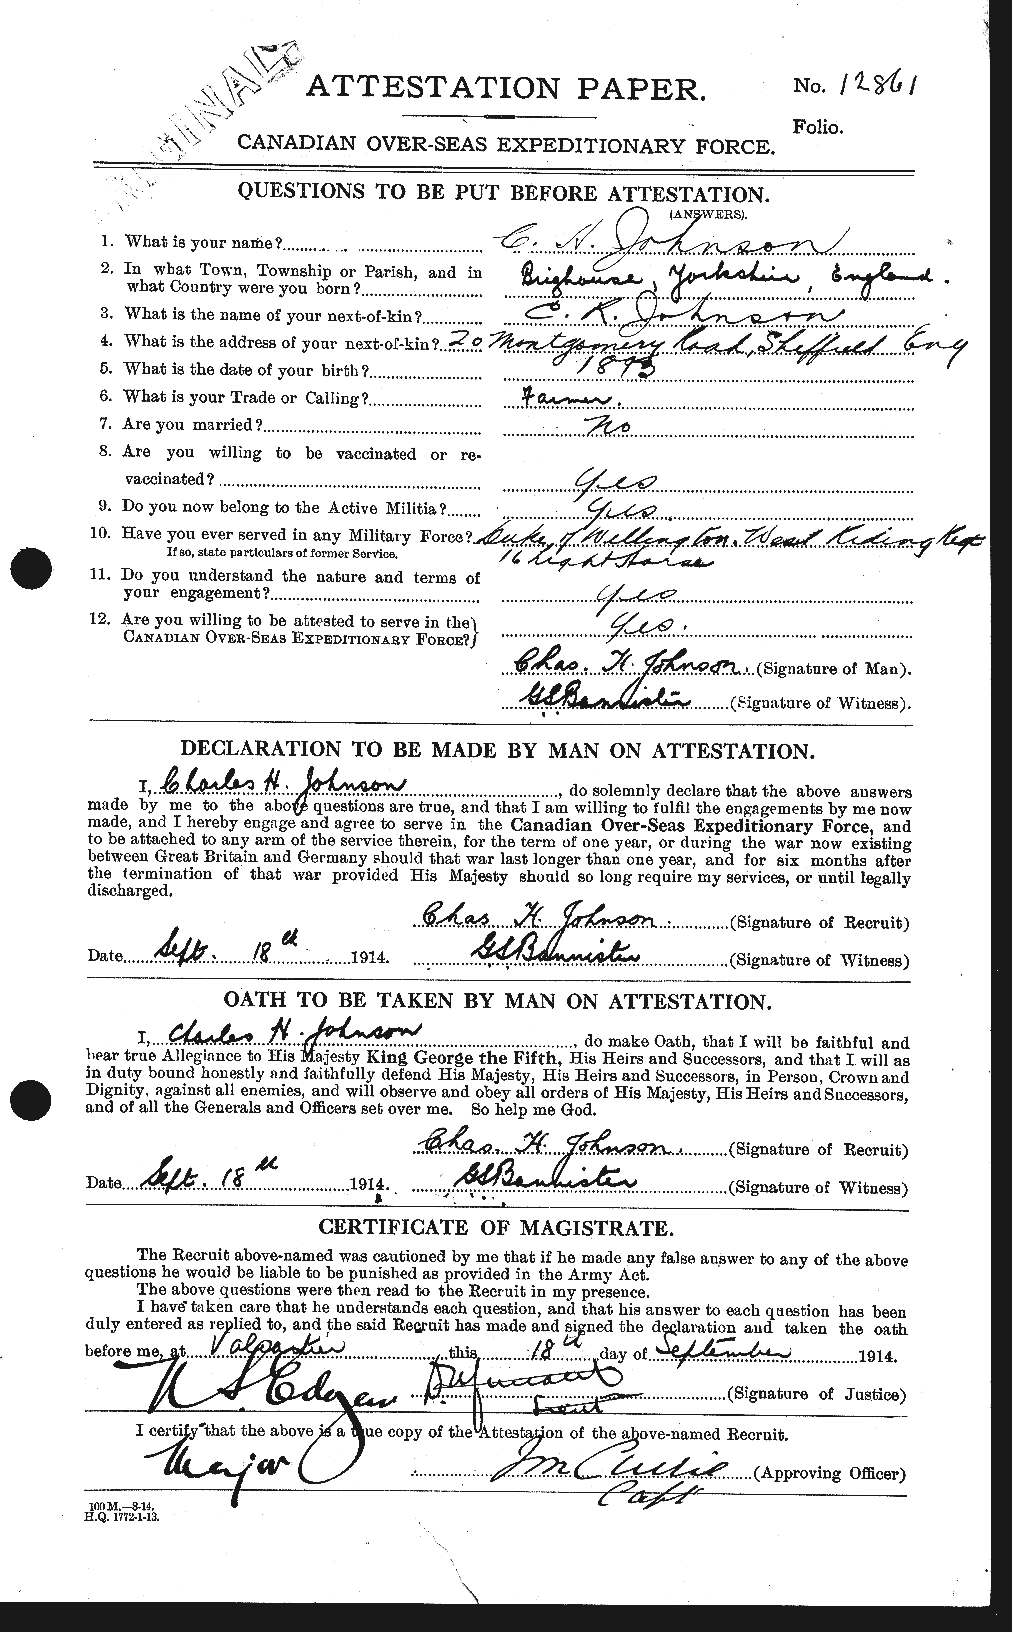 Personnel Records of the First World War - CEF 421410a